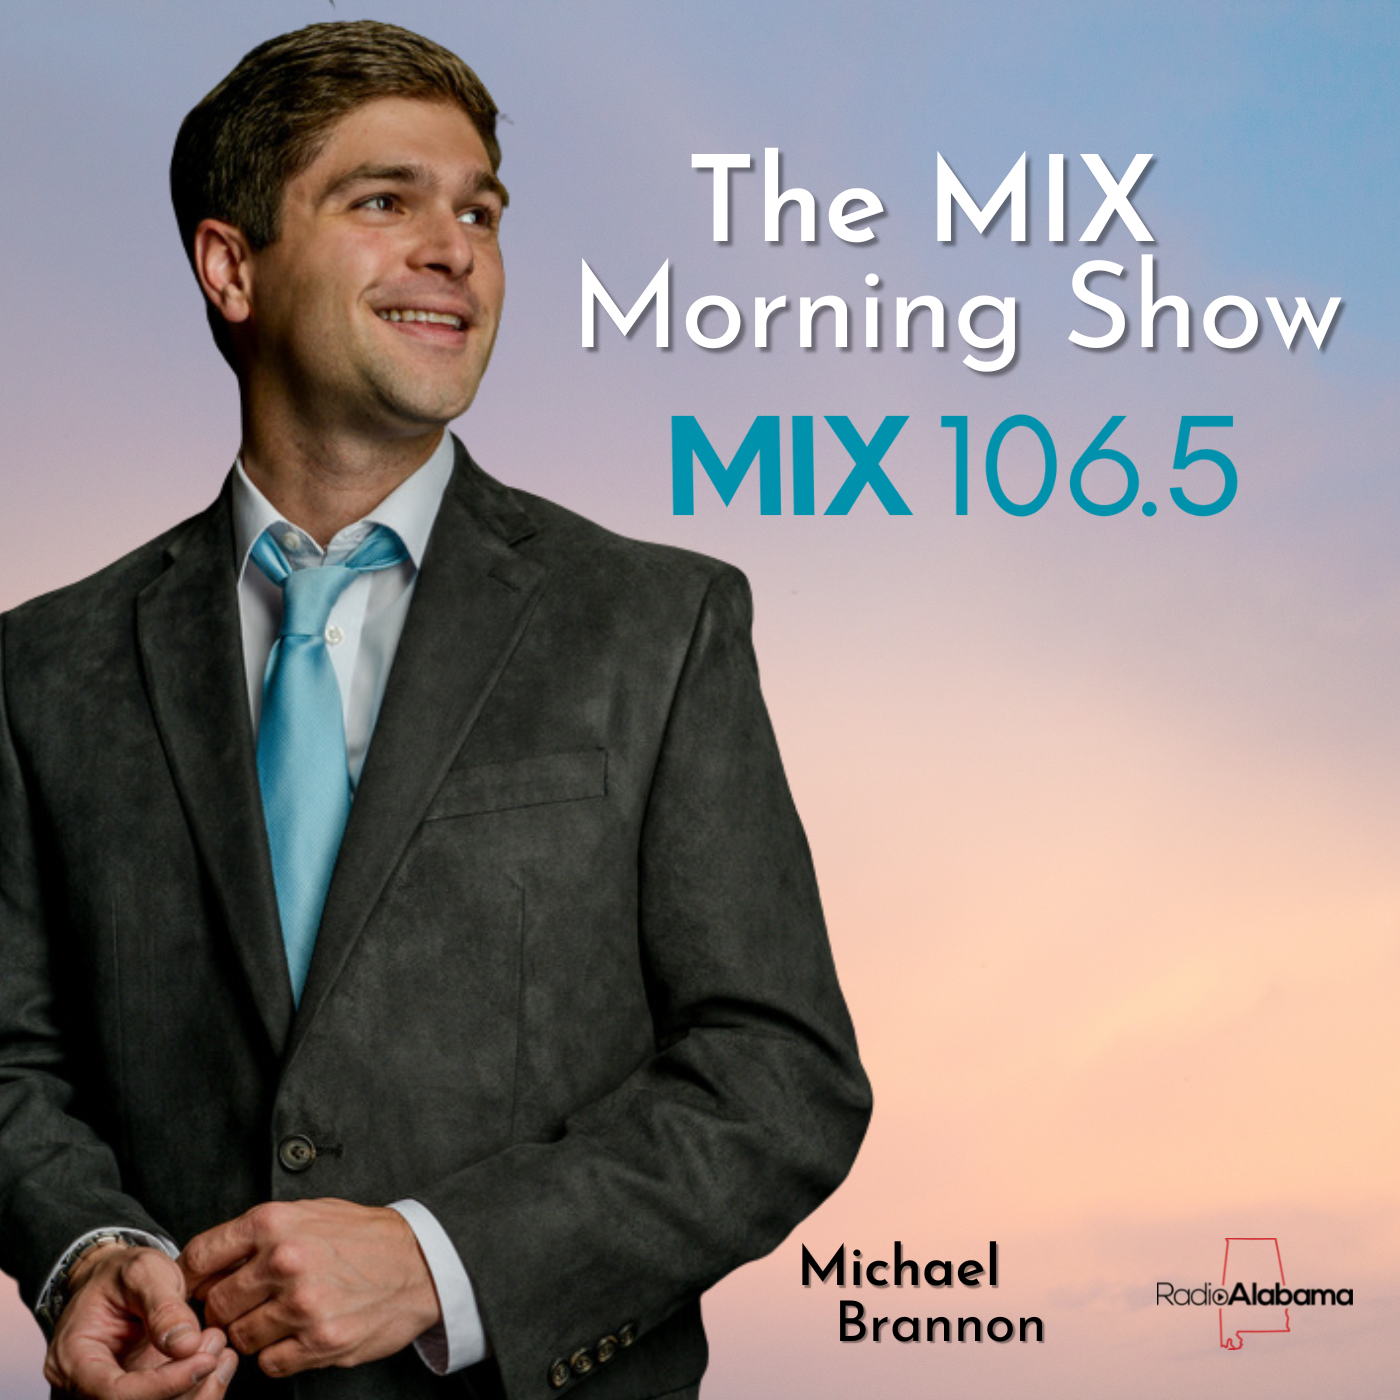 On-air with Michael - Golden opportunity at love (or not)